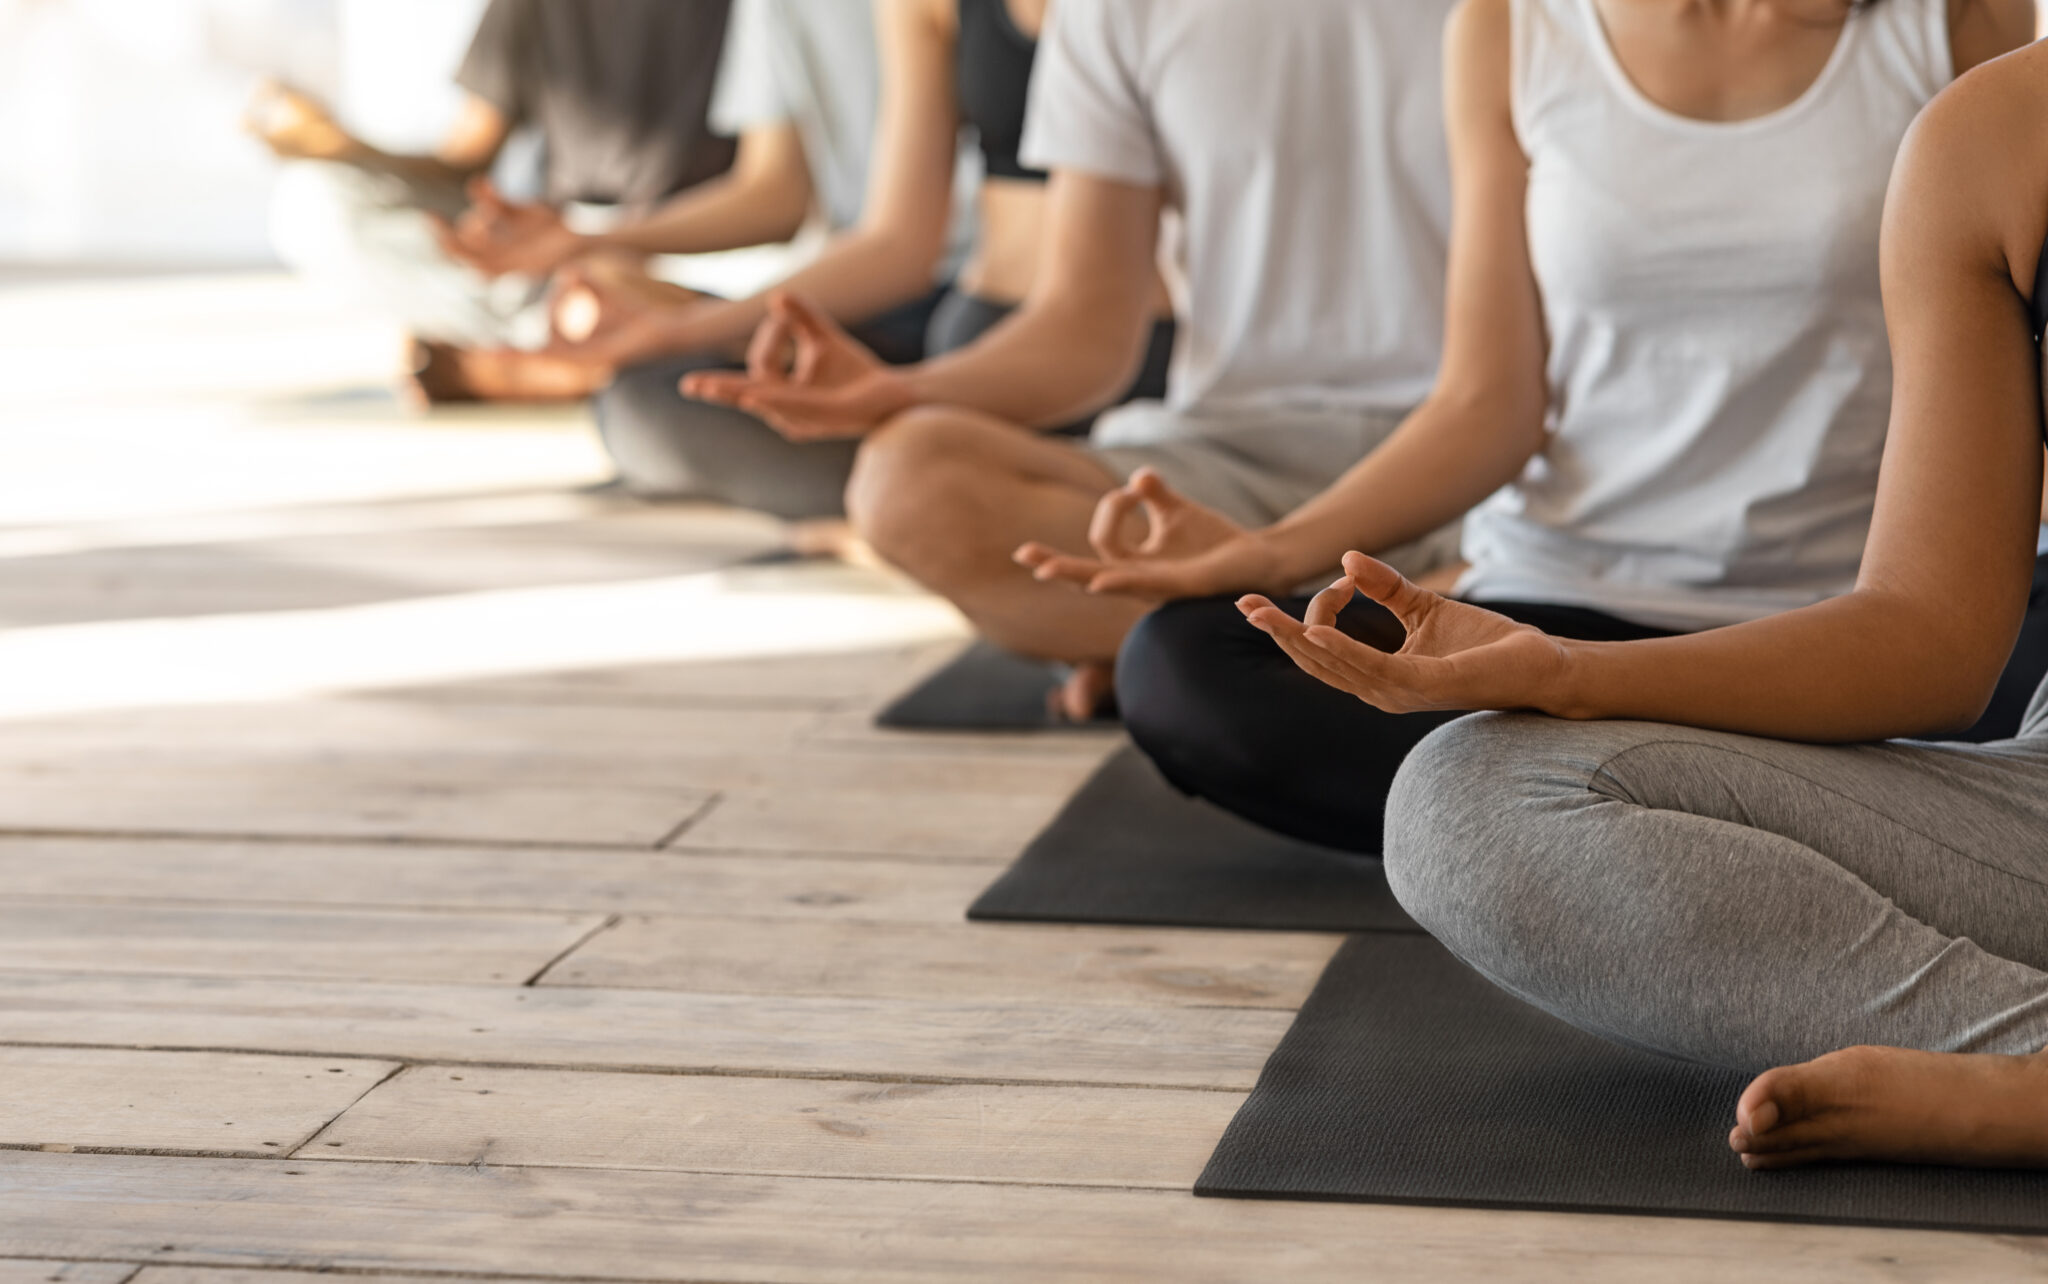 Unrecognizable Group Of People Practicing Yoga Together In Studio, Meditating In Lotus Position And Showing Mudra Gestures, Sitting Relaxed On Mats In A Row, Cropped Image With Free Space